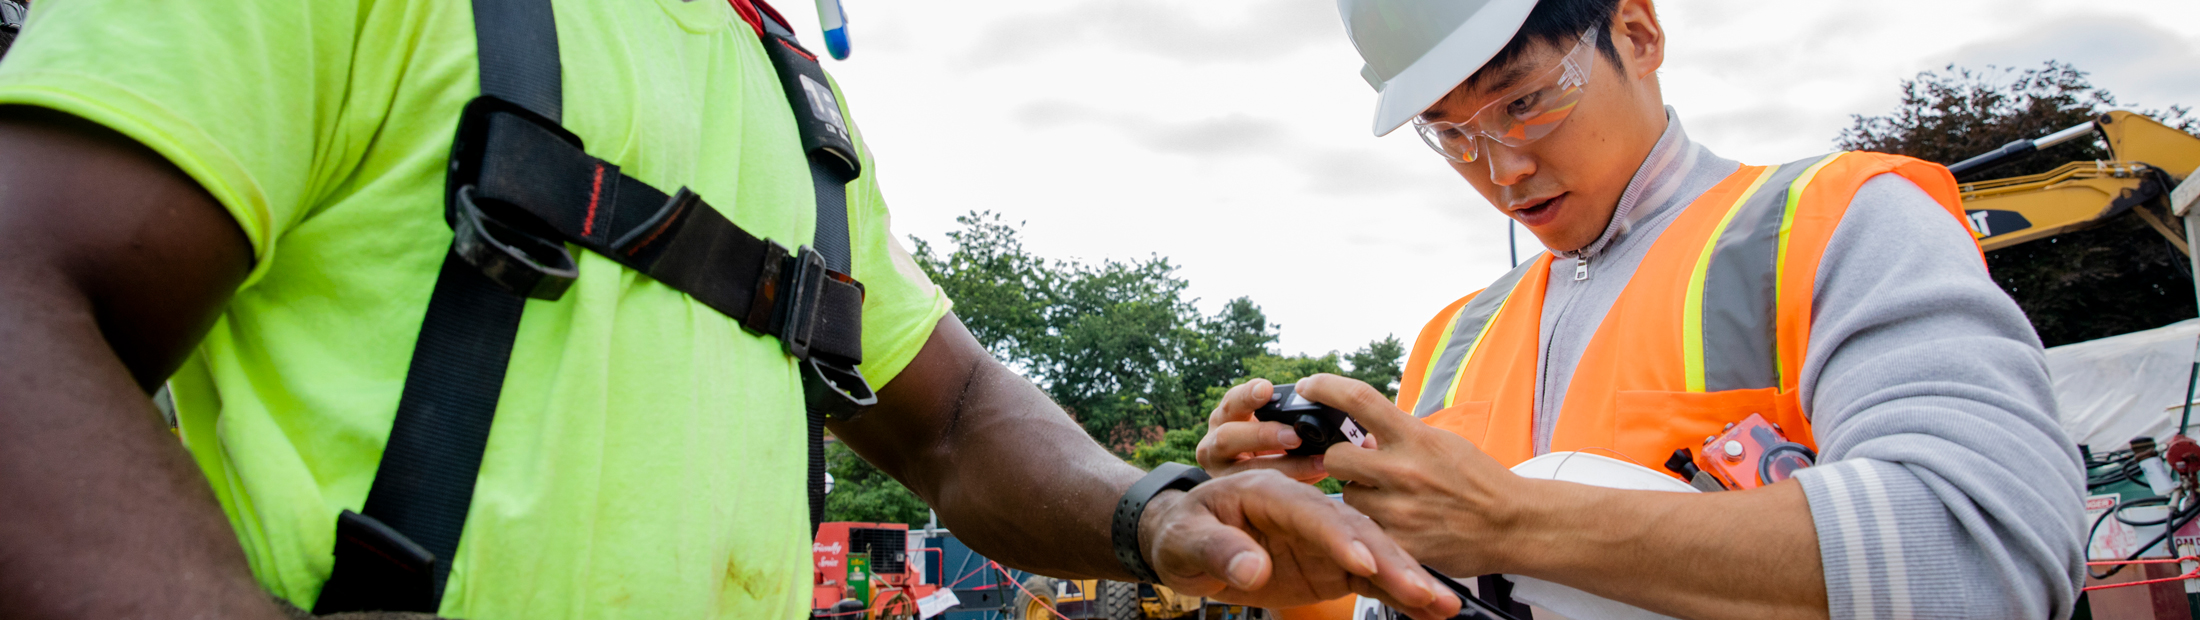 A researcher puts a heartbeat monitor on a construction worker